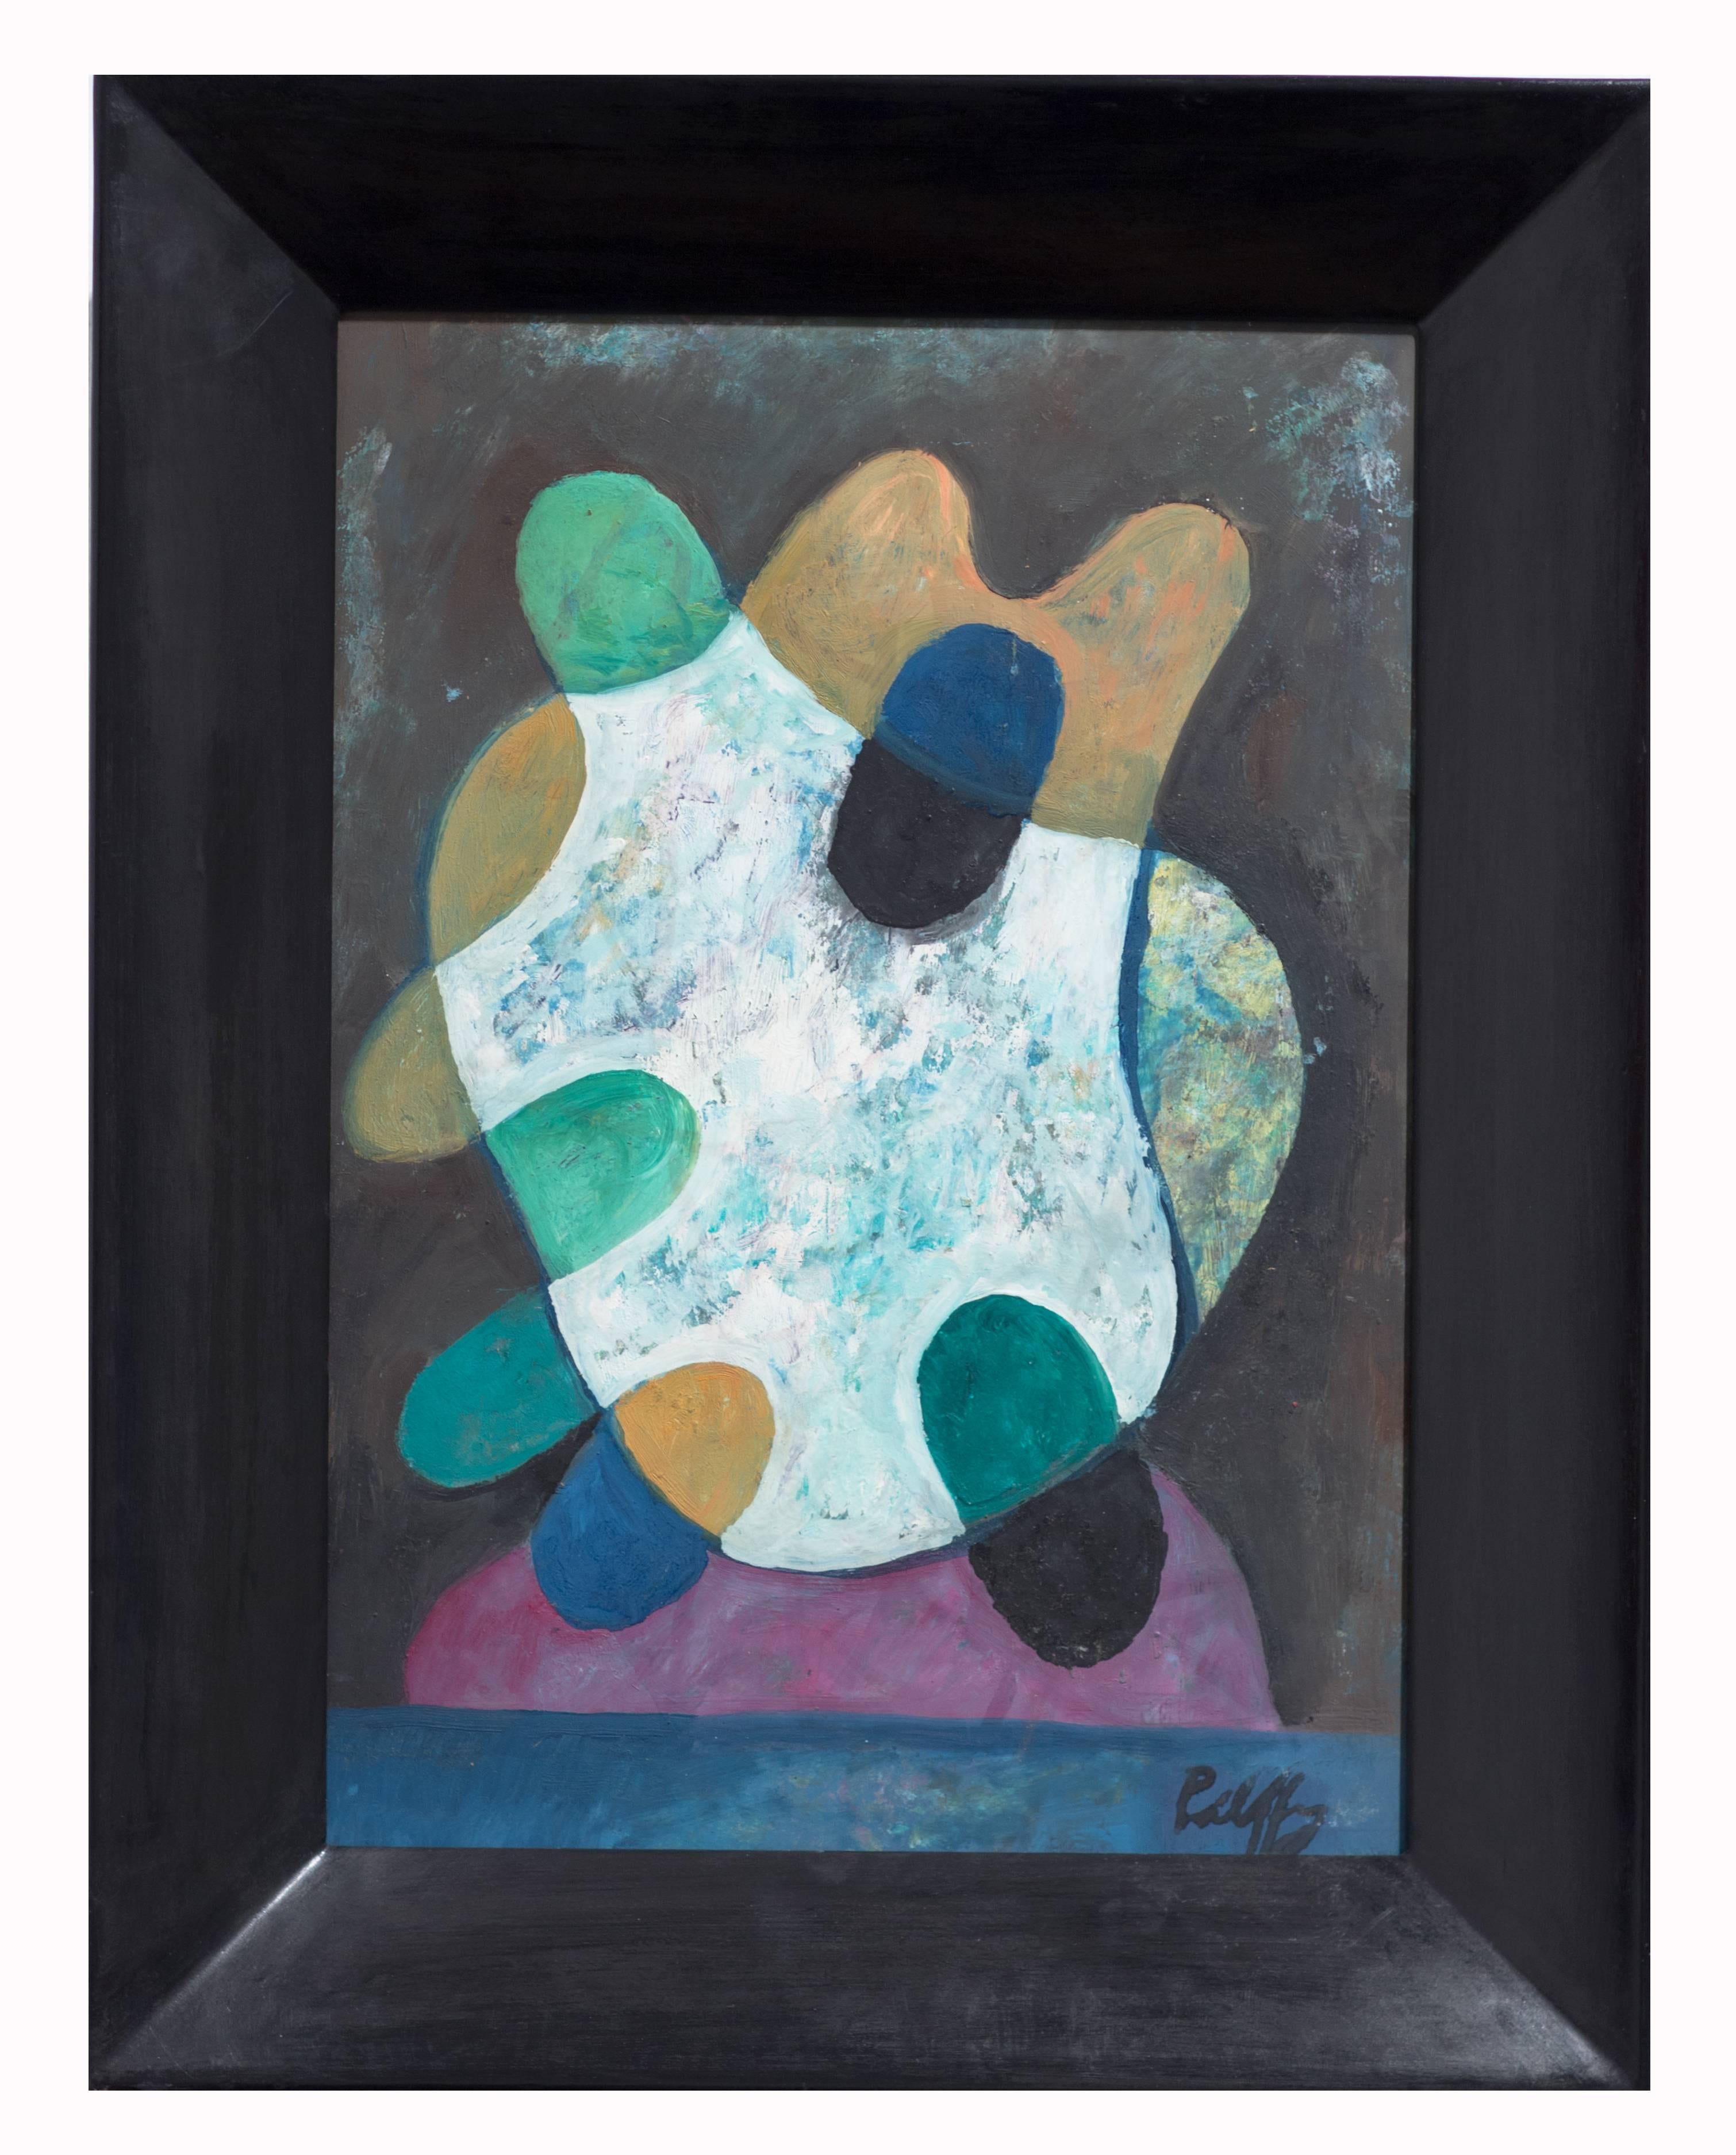 Peter Pálffy Abstract Painting - Palette, 1960s